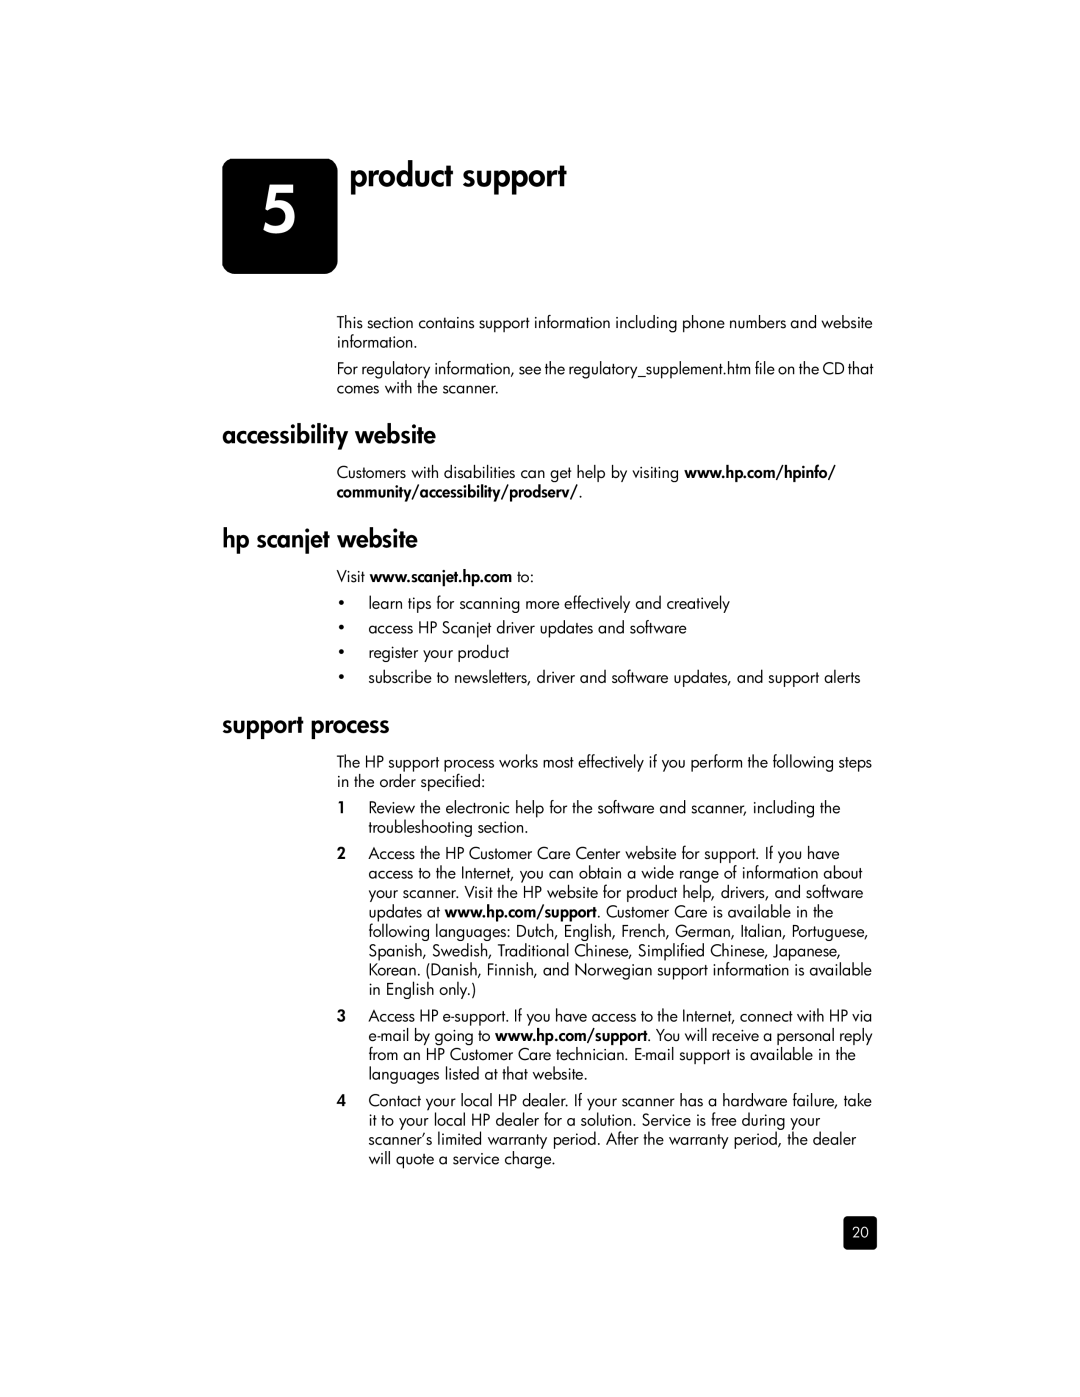 HP 3670, 3690 manual Accessibility website Hp scanjet website, Support process 